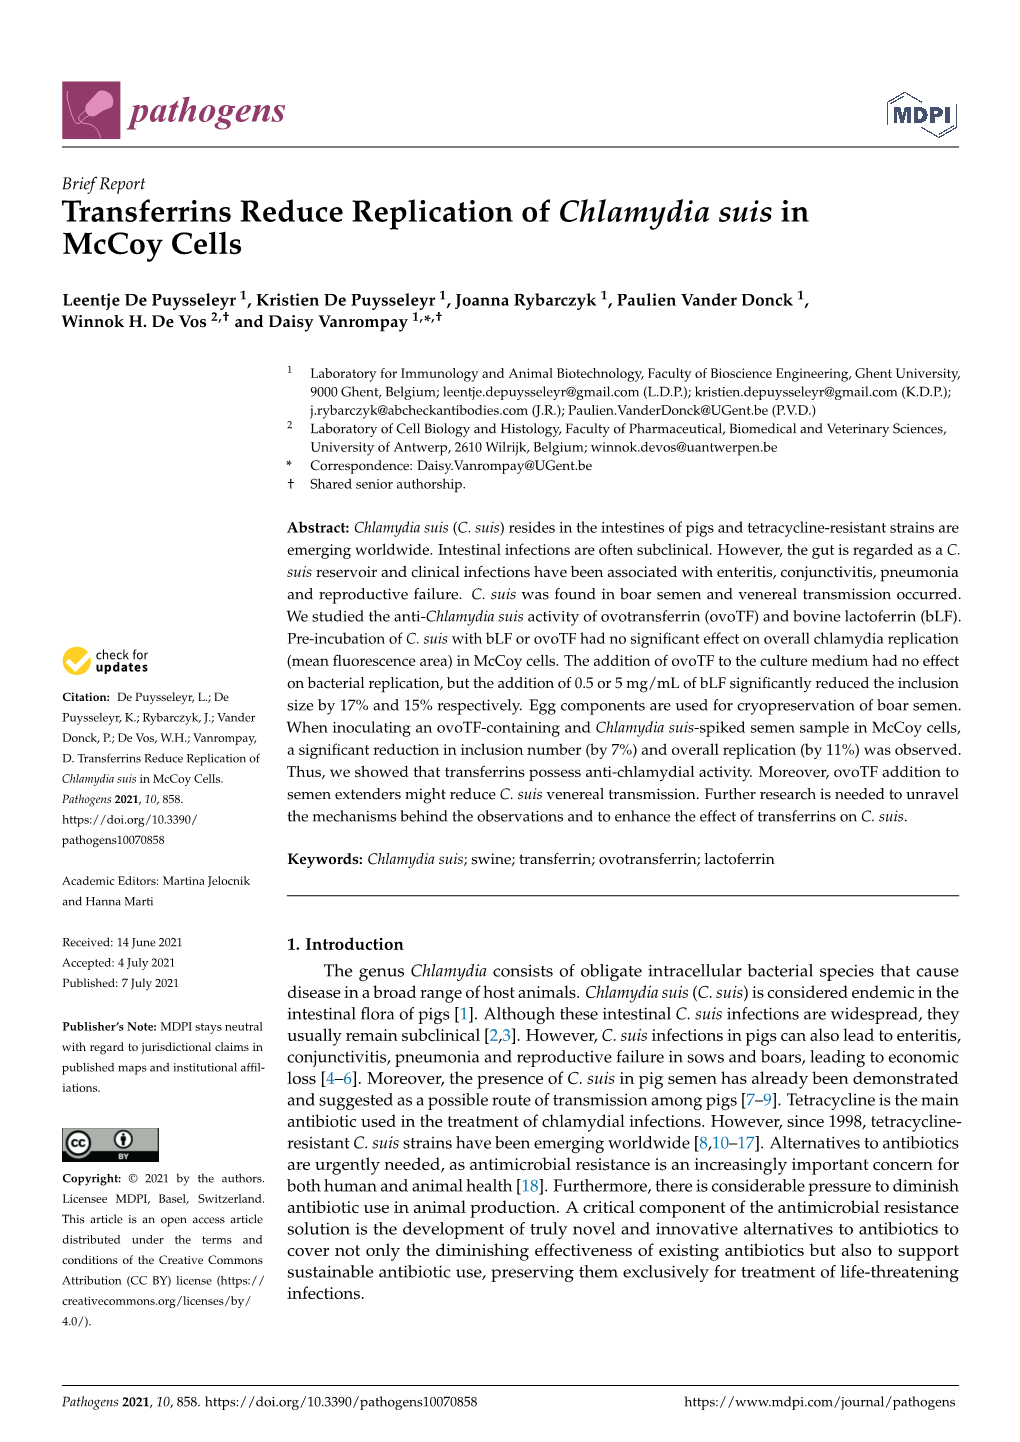 Transferrins Reduce Replication of Chlamydia Suis in Mccoy Cells